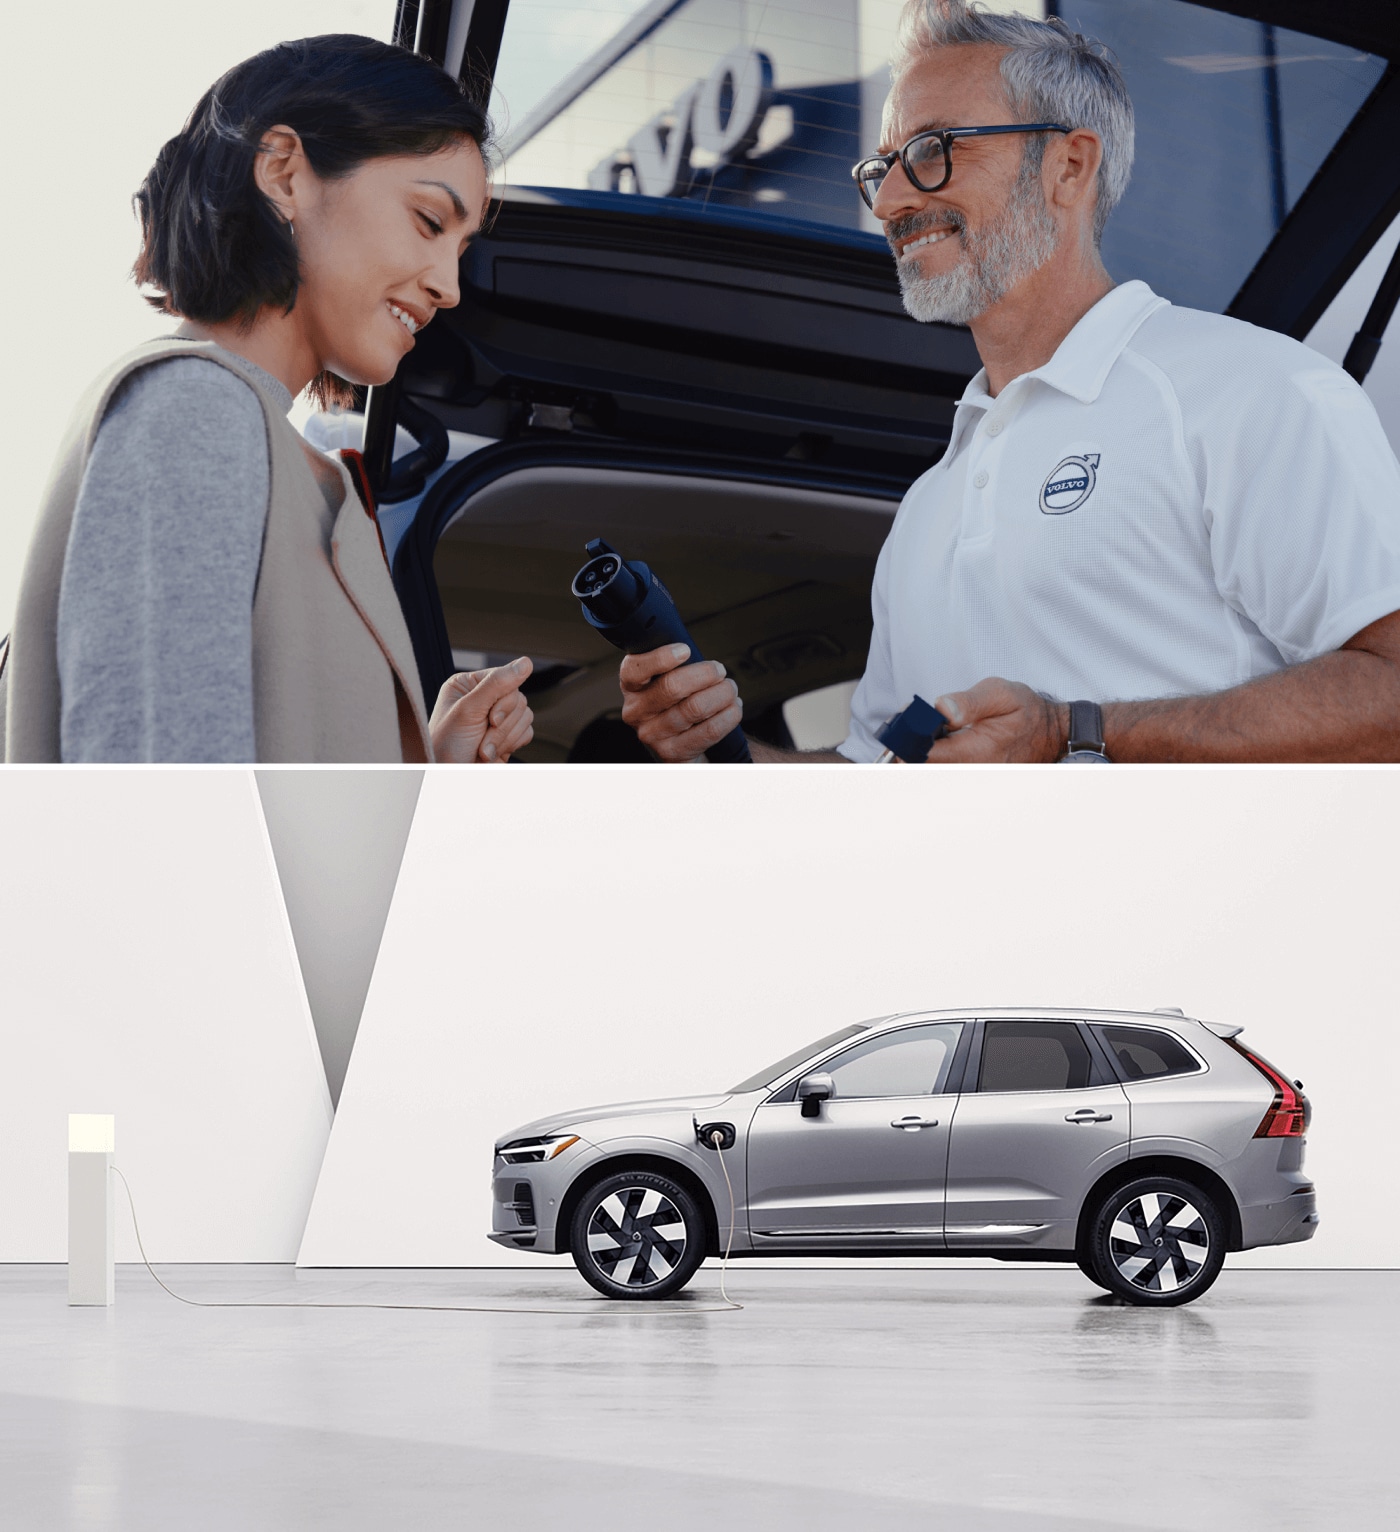 The Volvo Charging Network